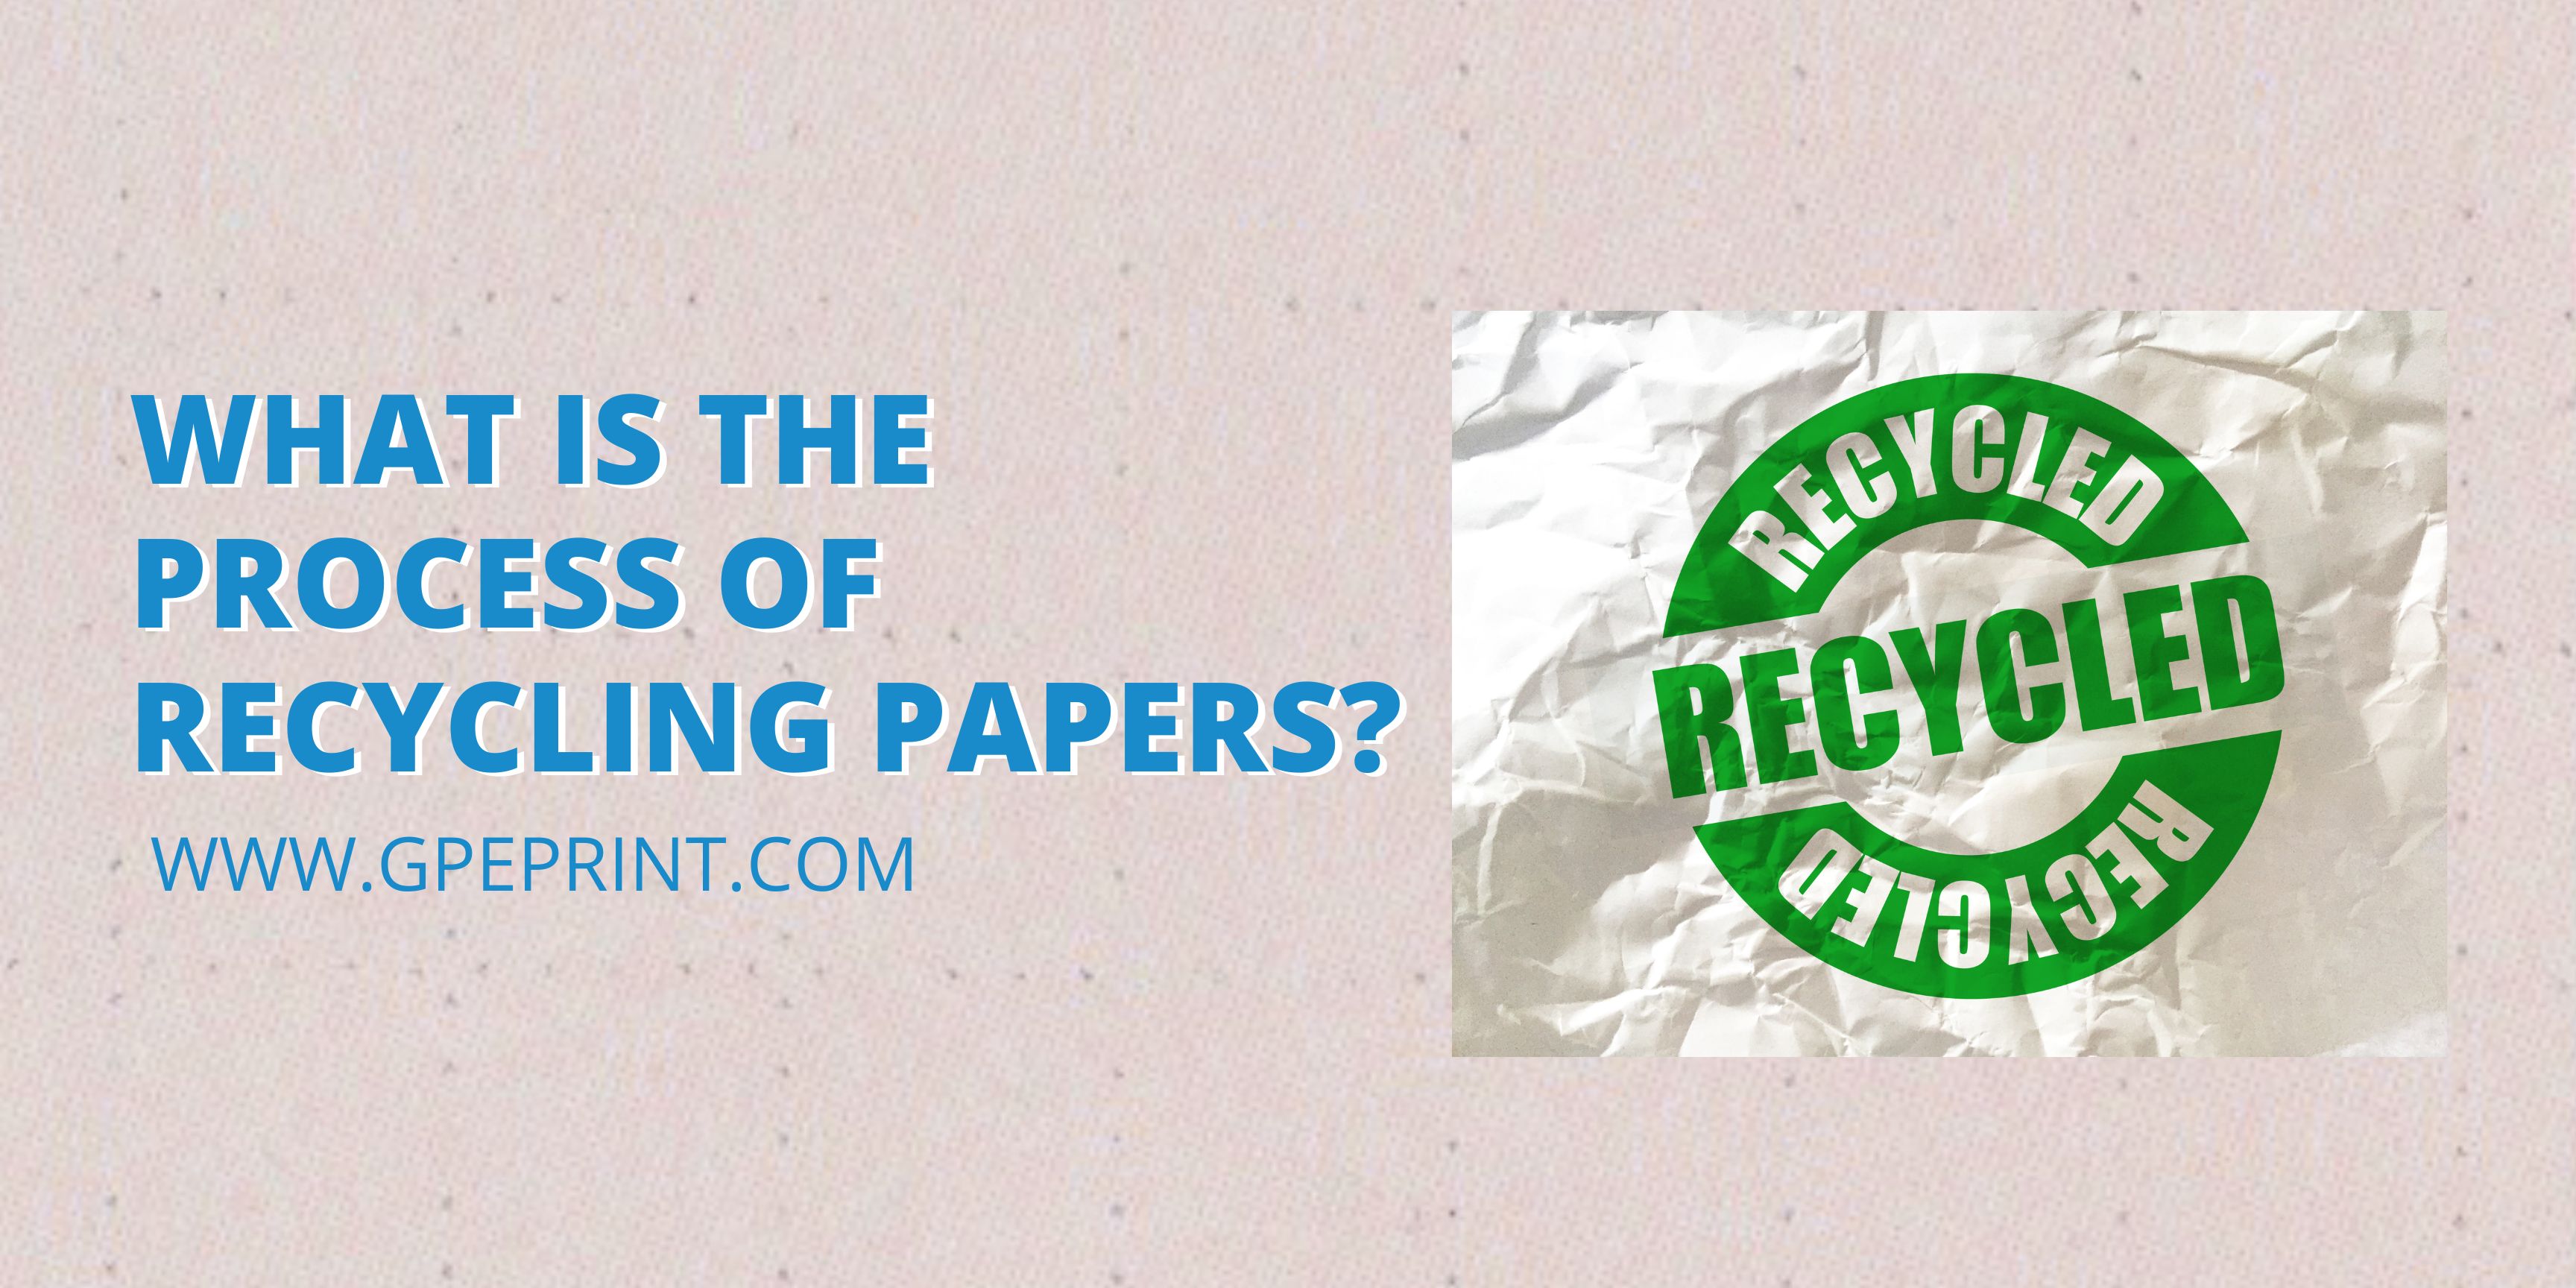 What Is the Process of Recycling Papers?